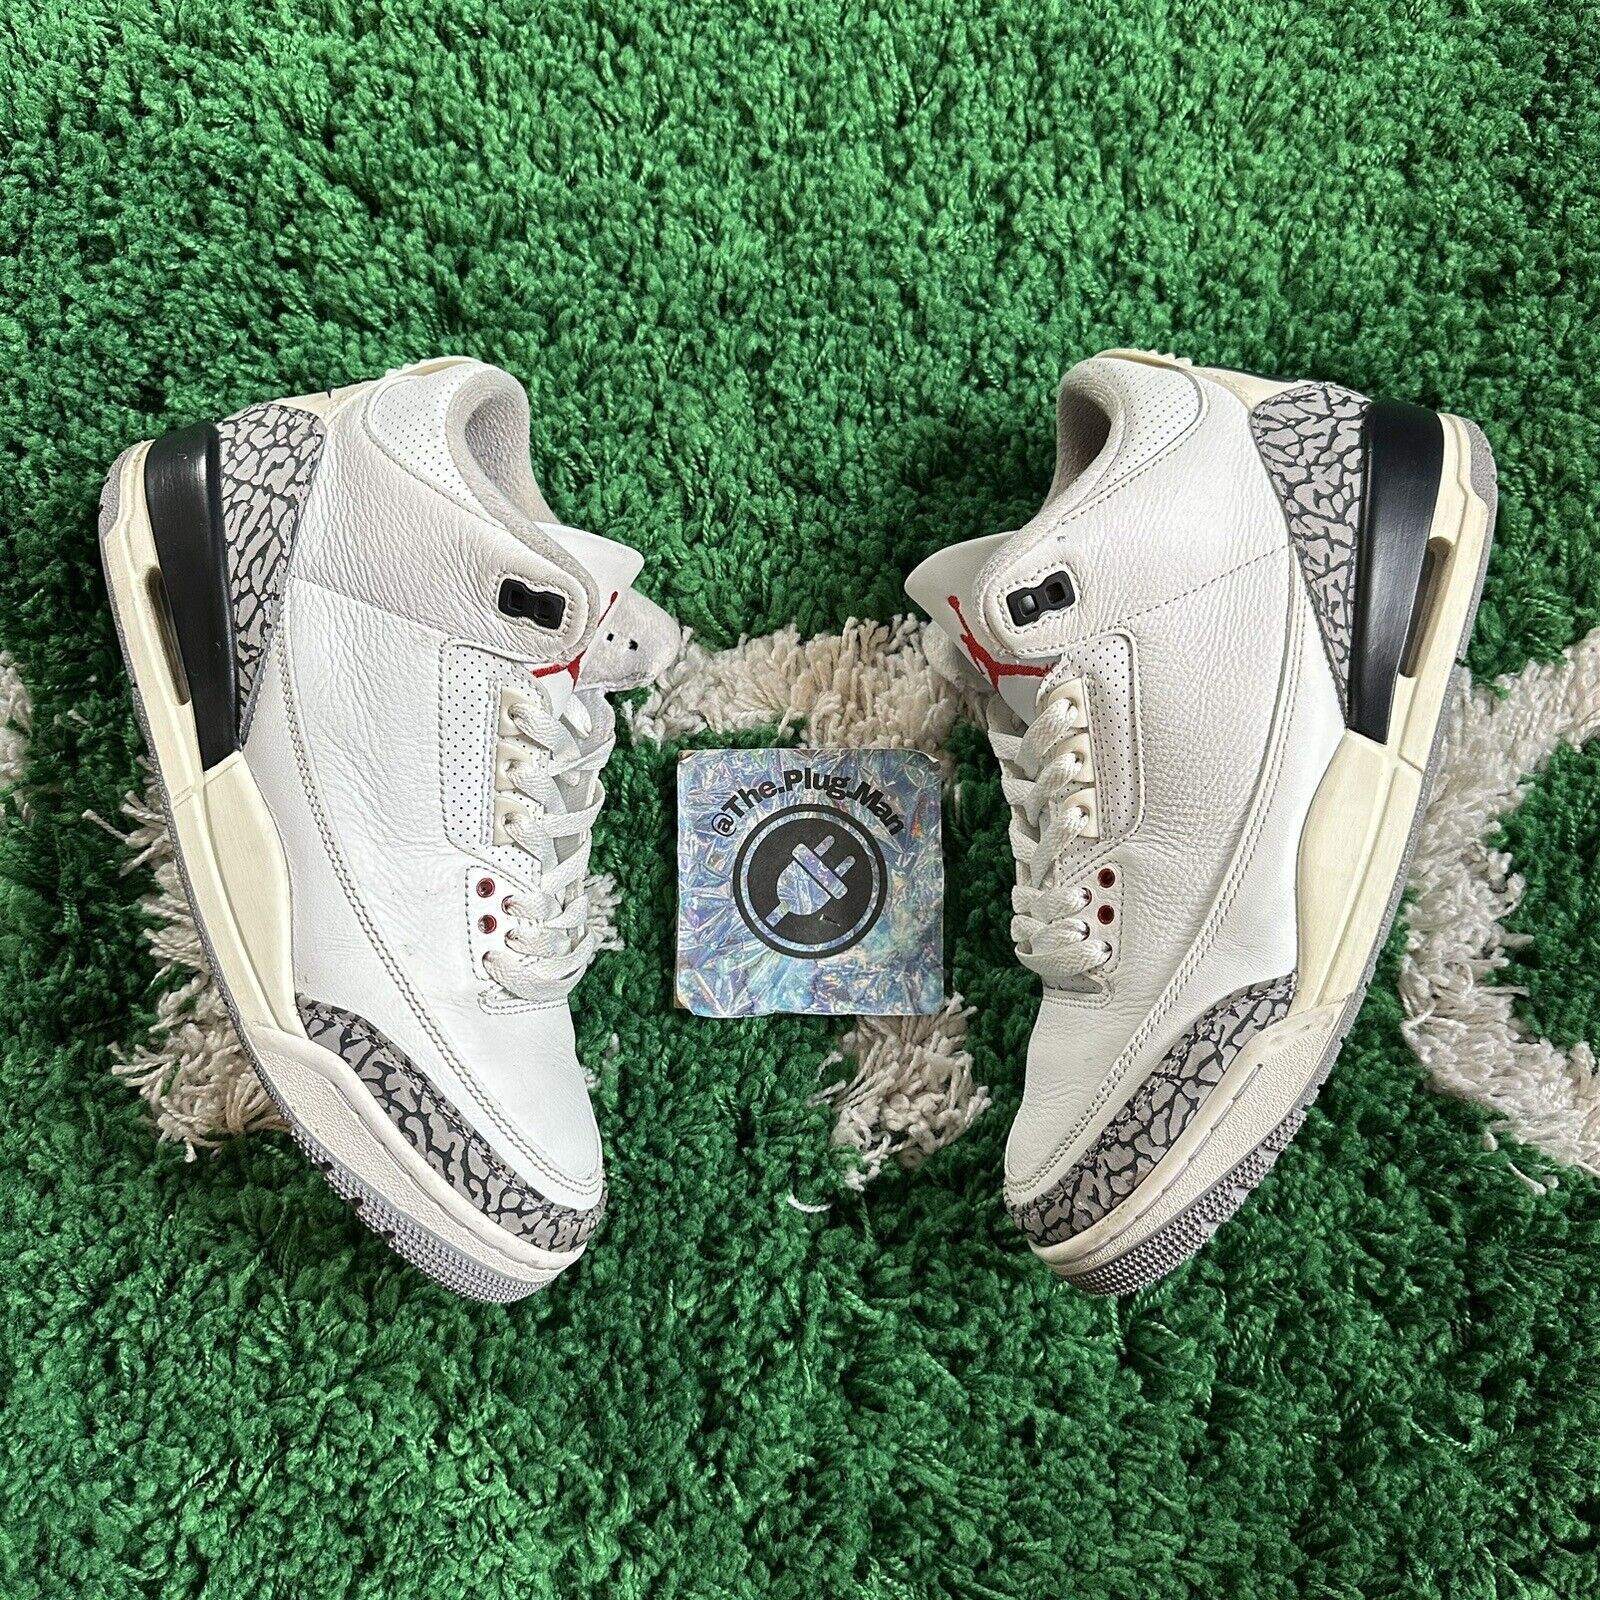 Pre-owned Jordan Brand 3 Retro Mid White Cement Reimagined Shoes